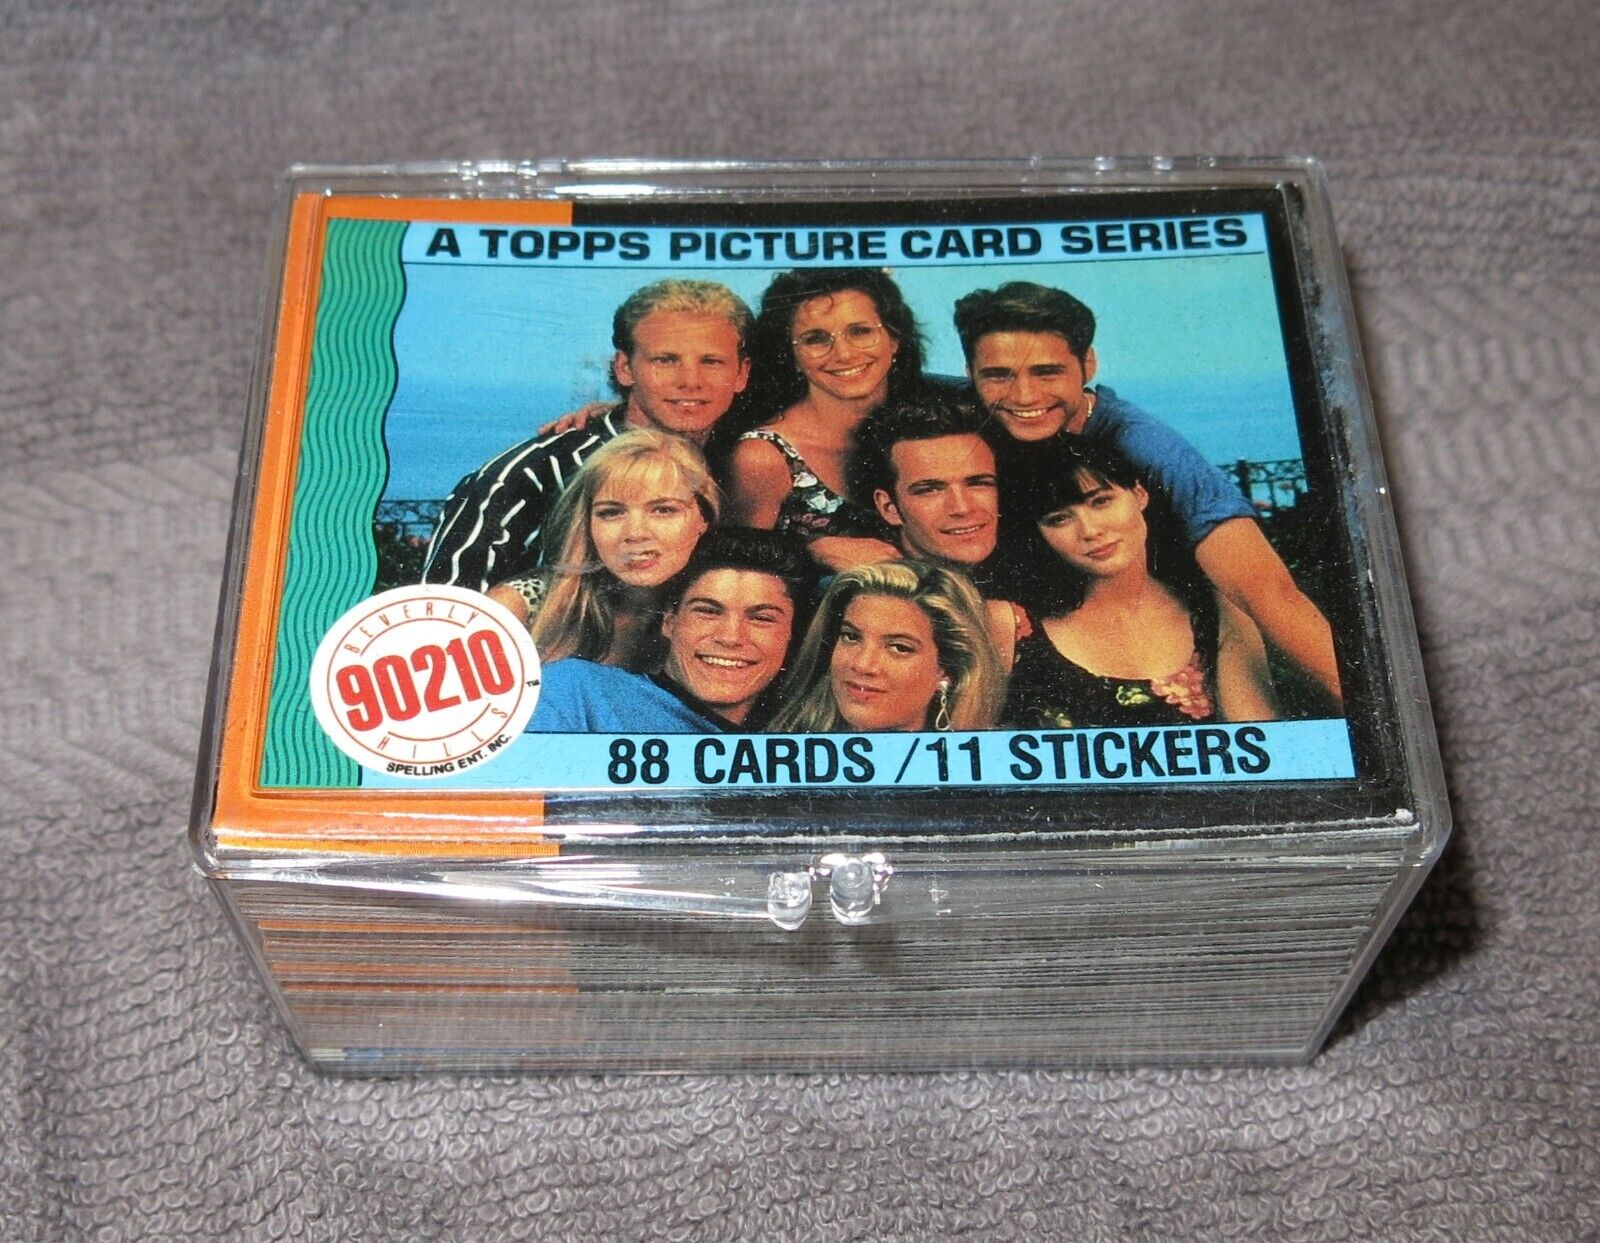 Topps 1991 90210 Complete 88 Card Set With 11 Stickers in Plastic Case